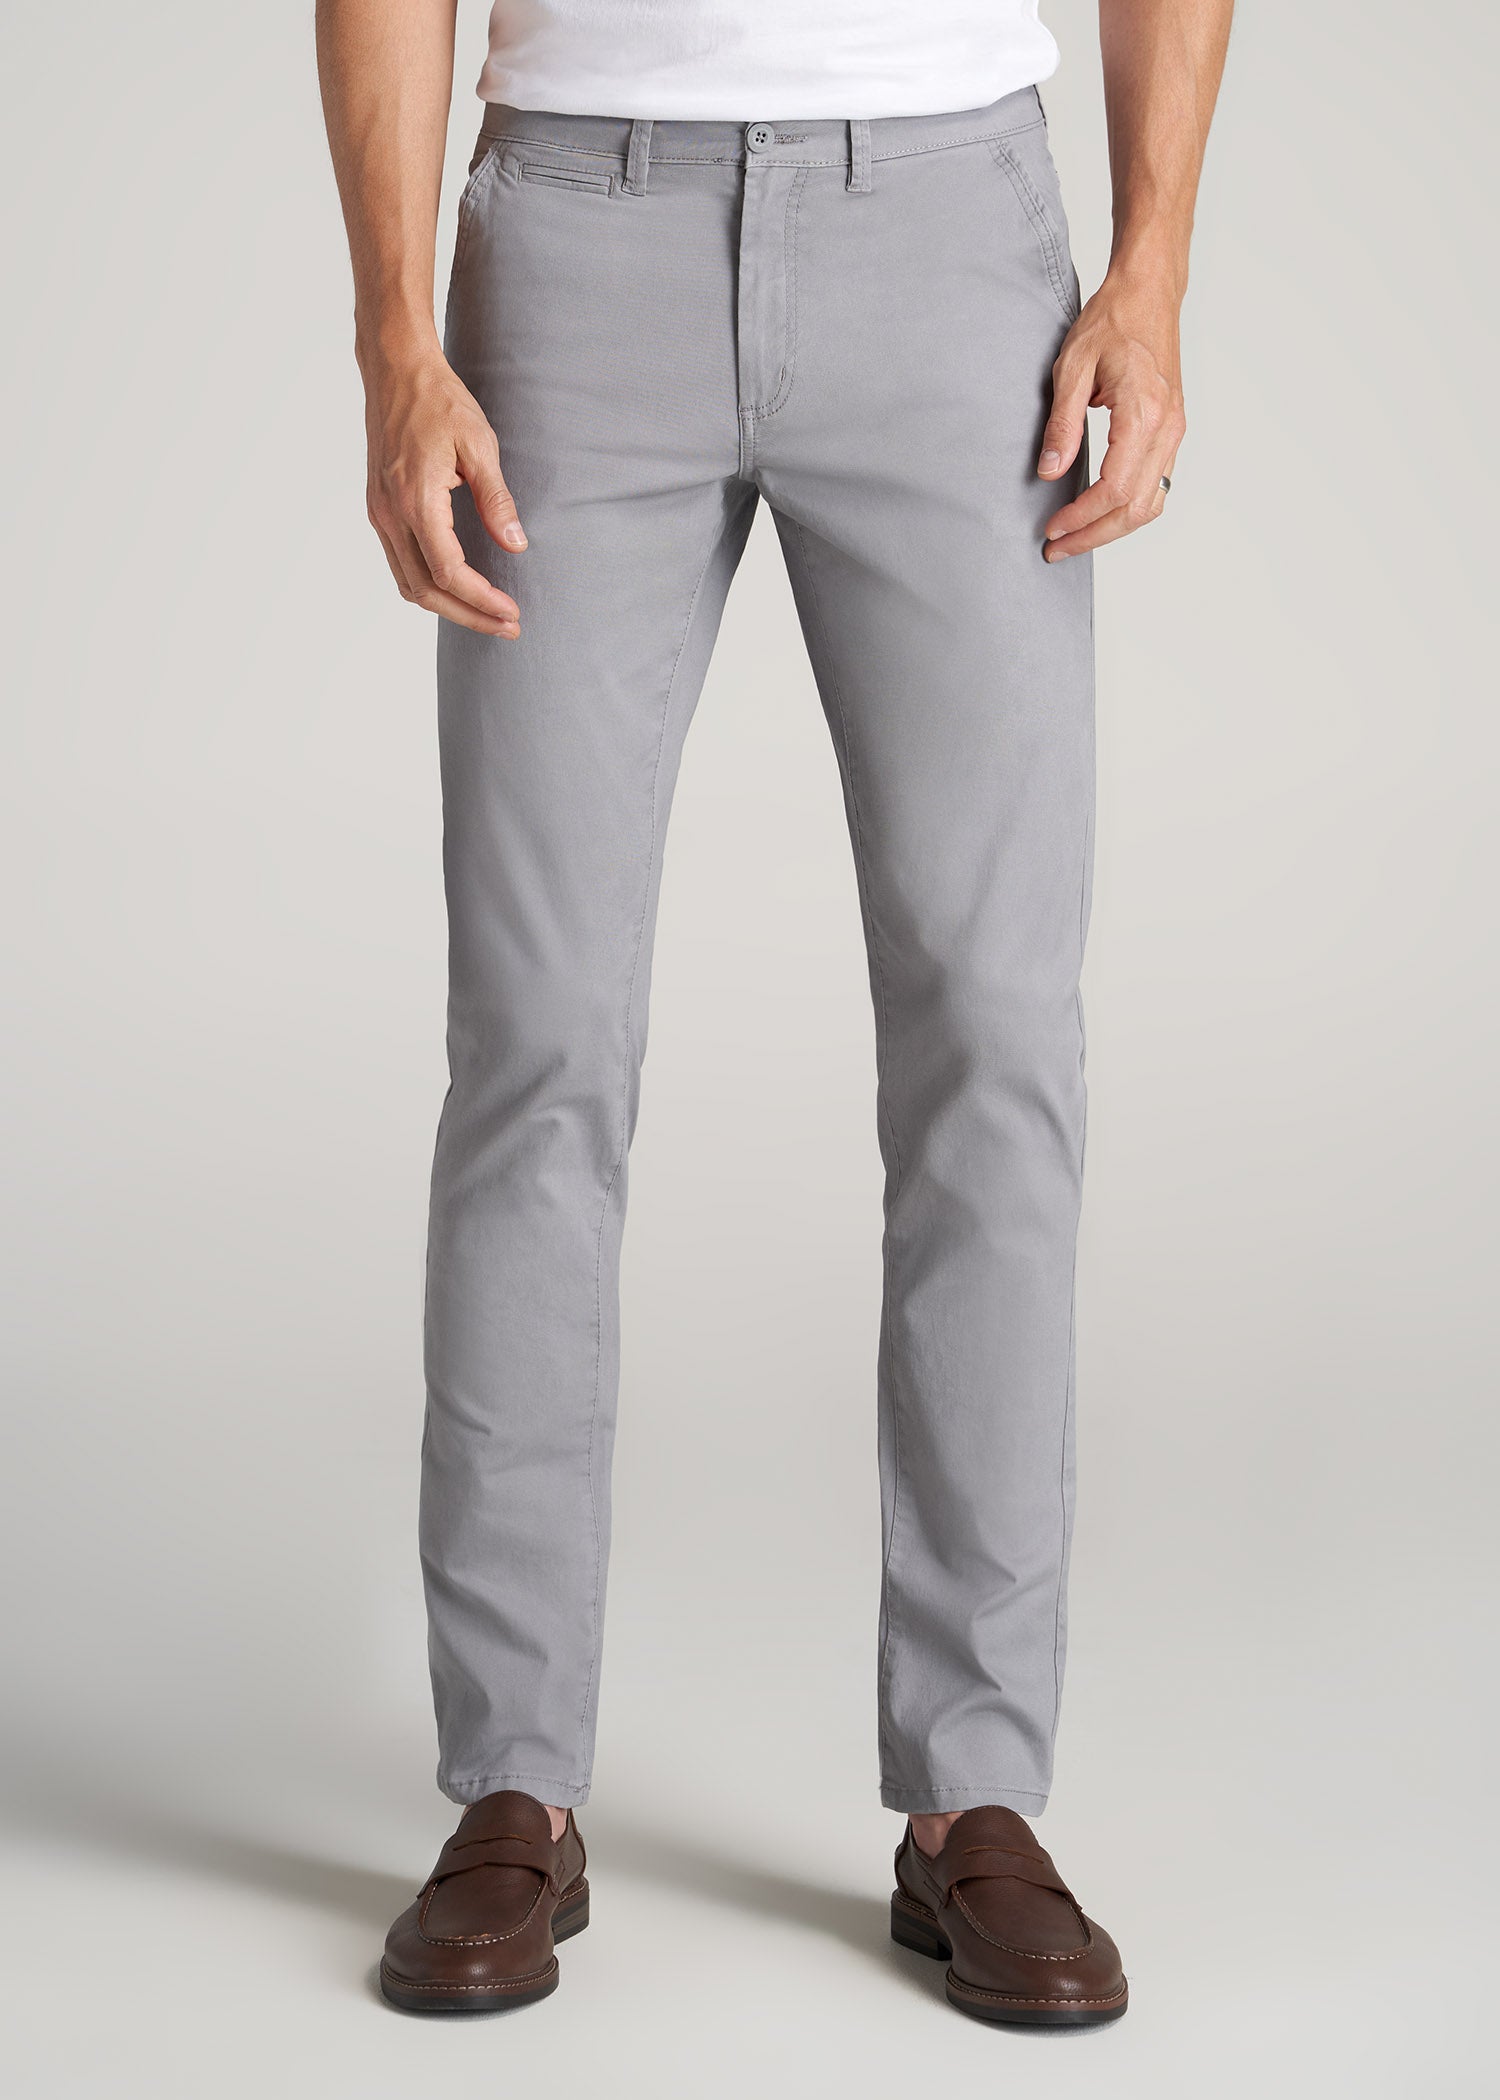 Men's Athletic Tapered Pants & Chinos